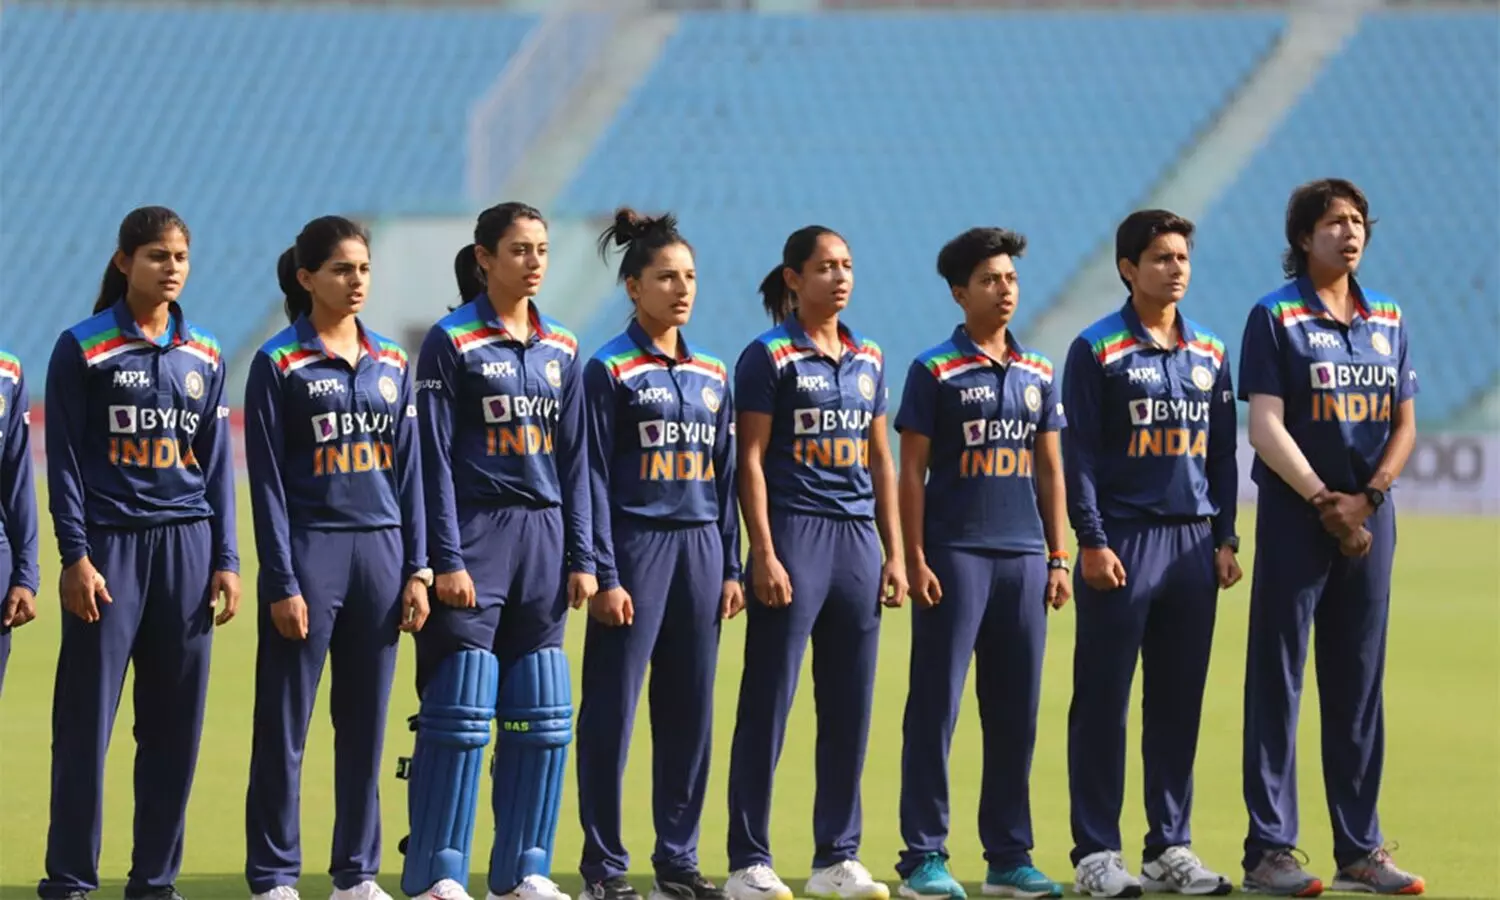 Cricket Girls Xxx Video - Salaries of Indian cricketers: Differences between men's and women's teams